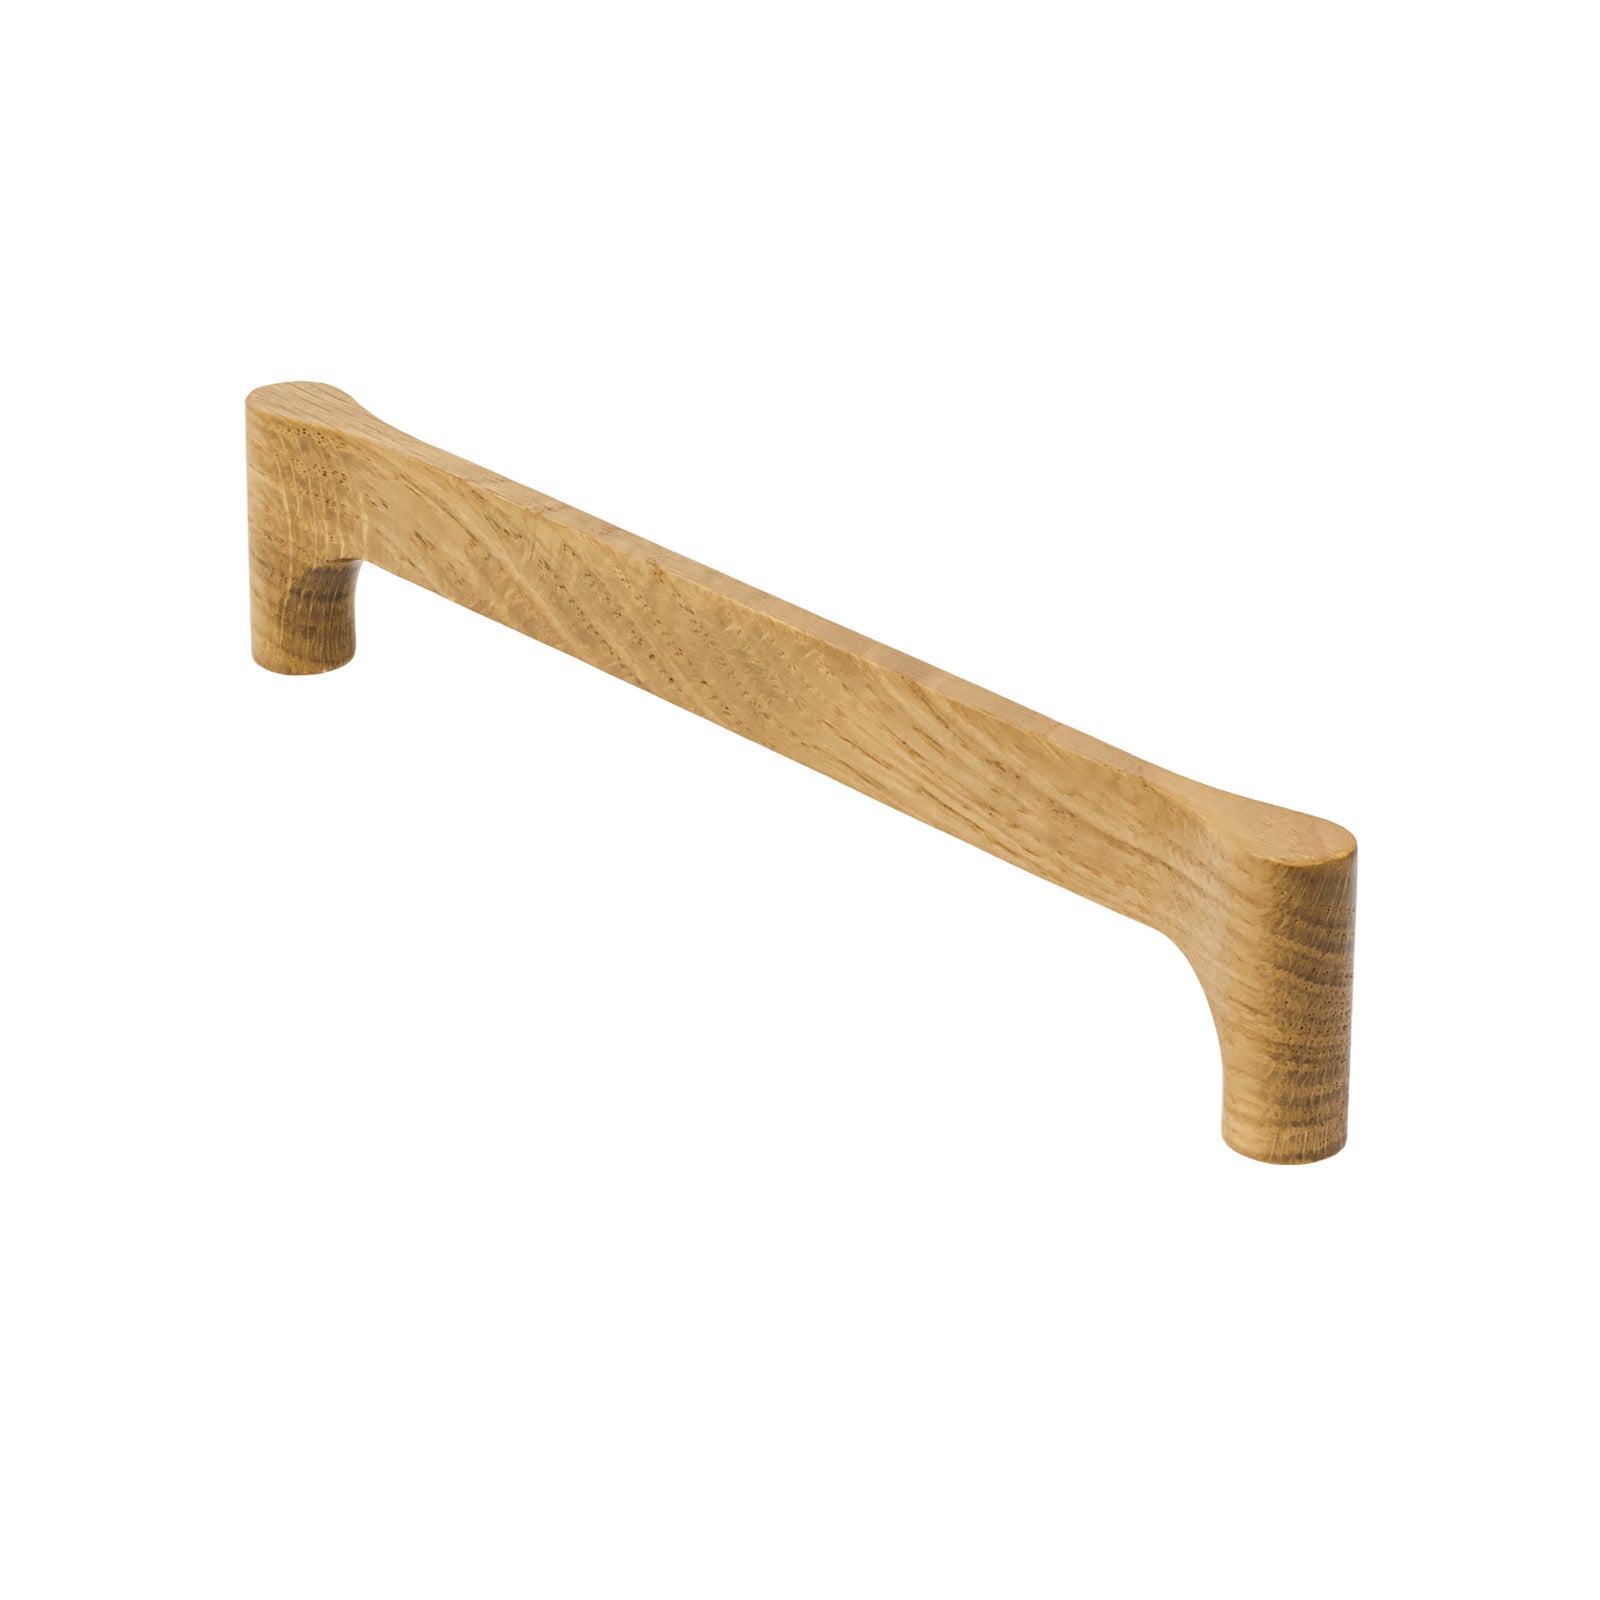 SHOW 224mm Gio Cabinet Pull Handle In Oak Finish